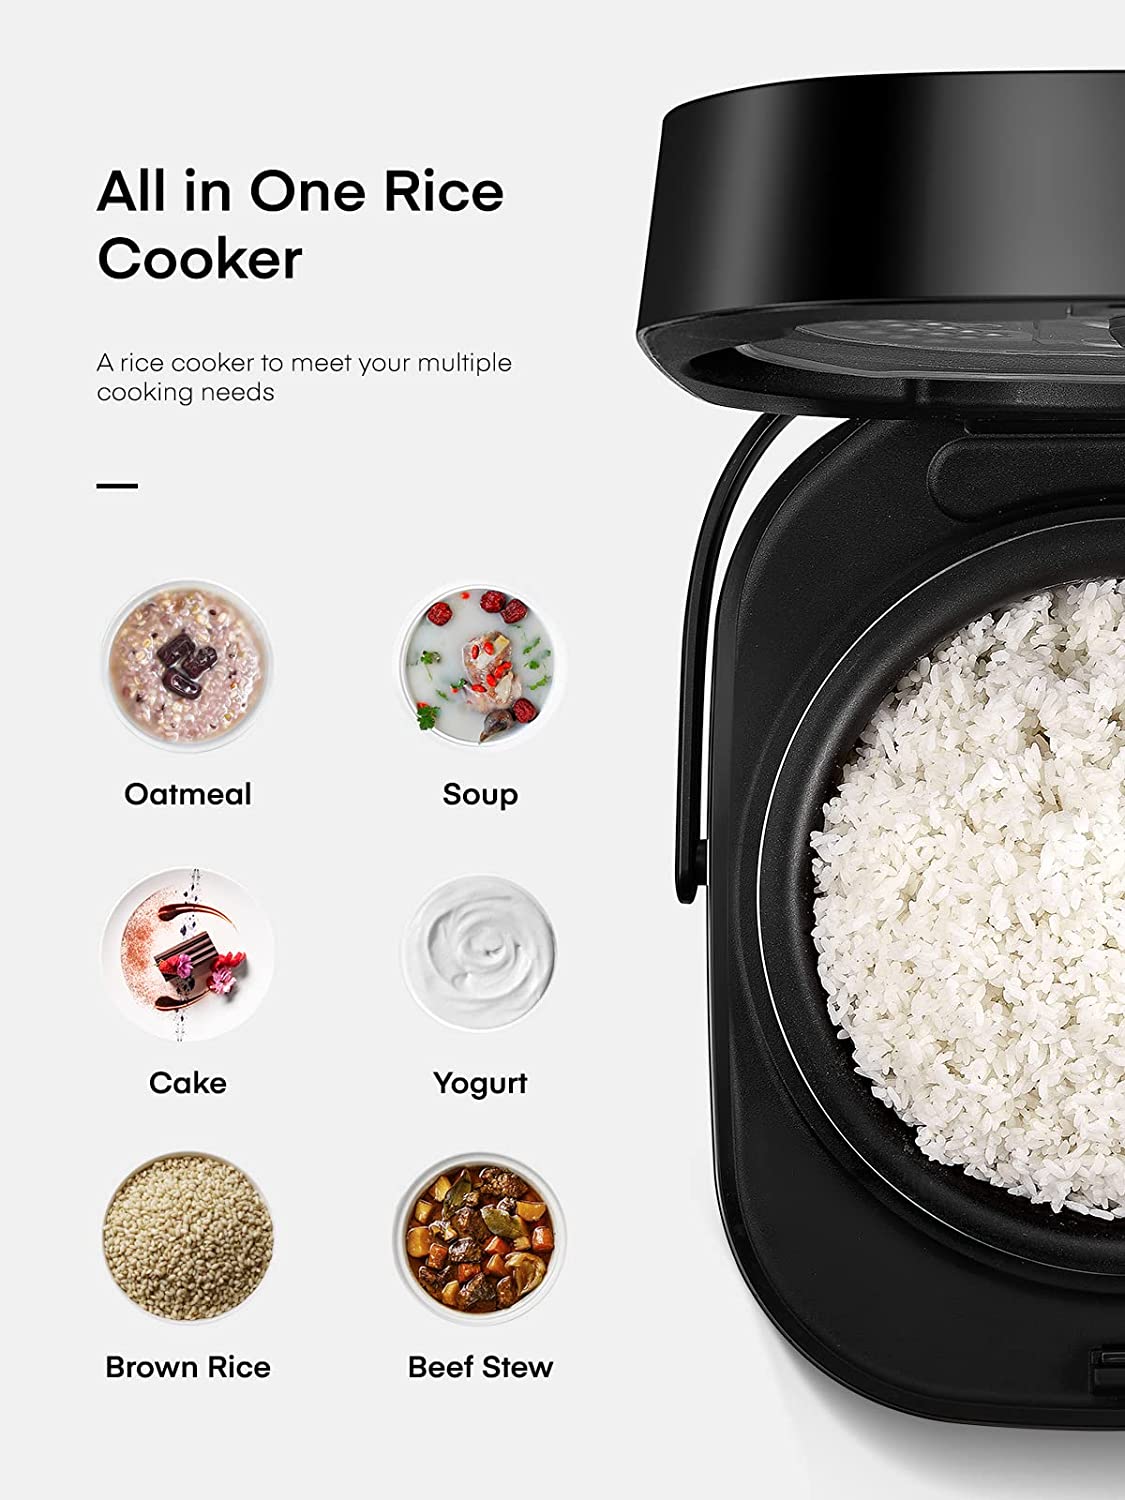 all in one rice cooker, Rice Cooker, Food Steamer, Slow cooker, All in One Digital Programmable Rice Cooker with 10 Preset Programs, Large Capacity for 10-Cup Uncooked Rice, Auto Warmer and 24 Hours Delay Timer, Recipe